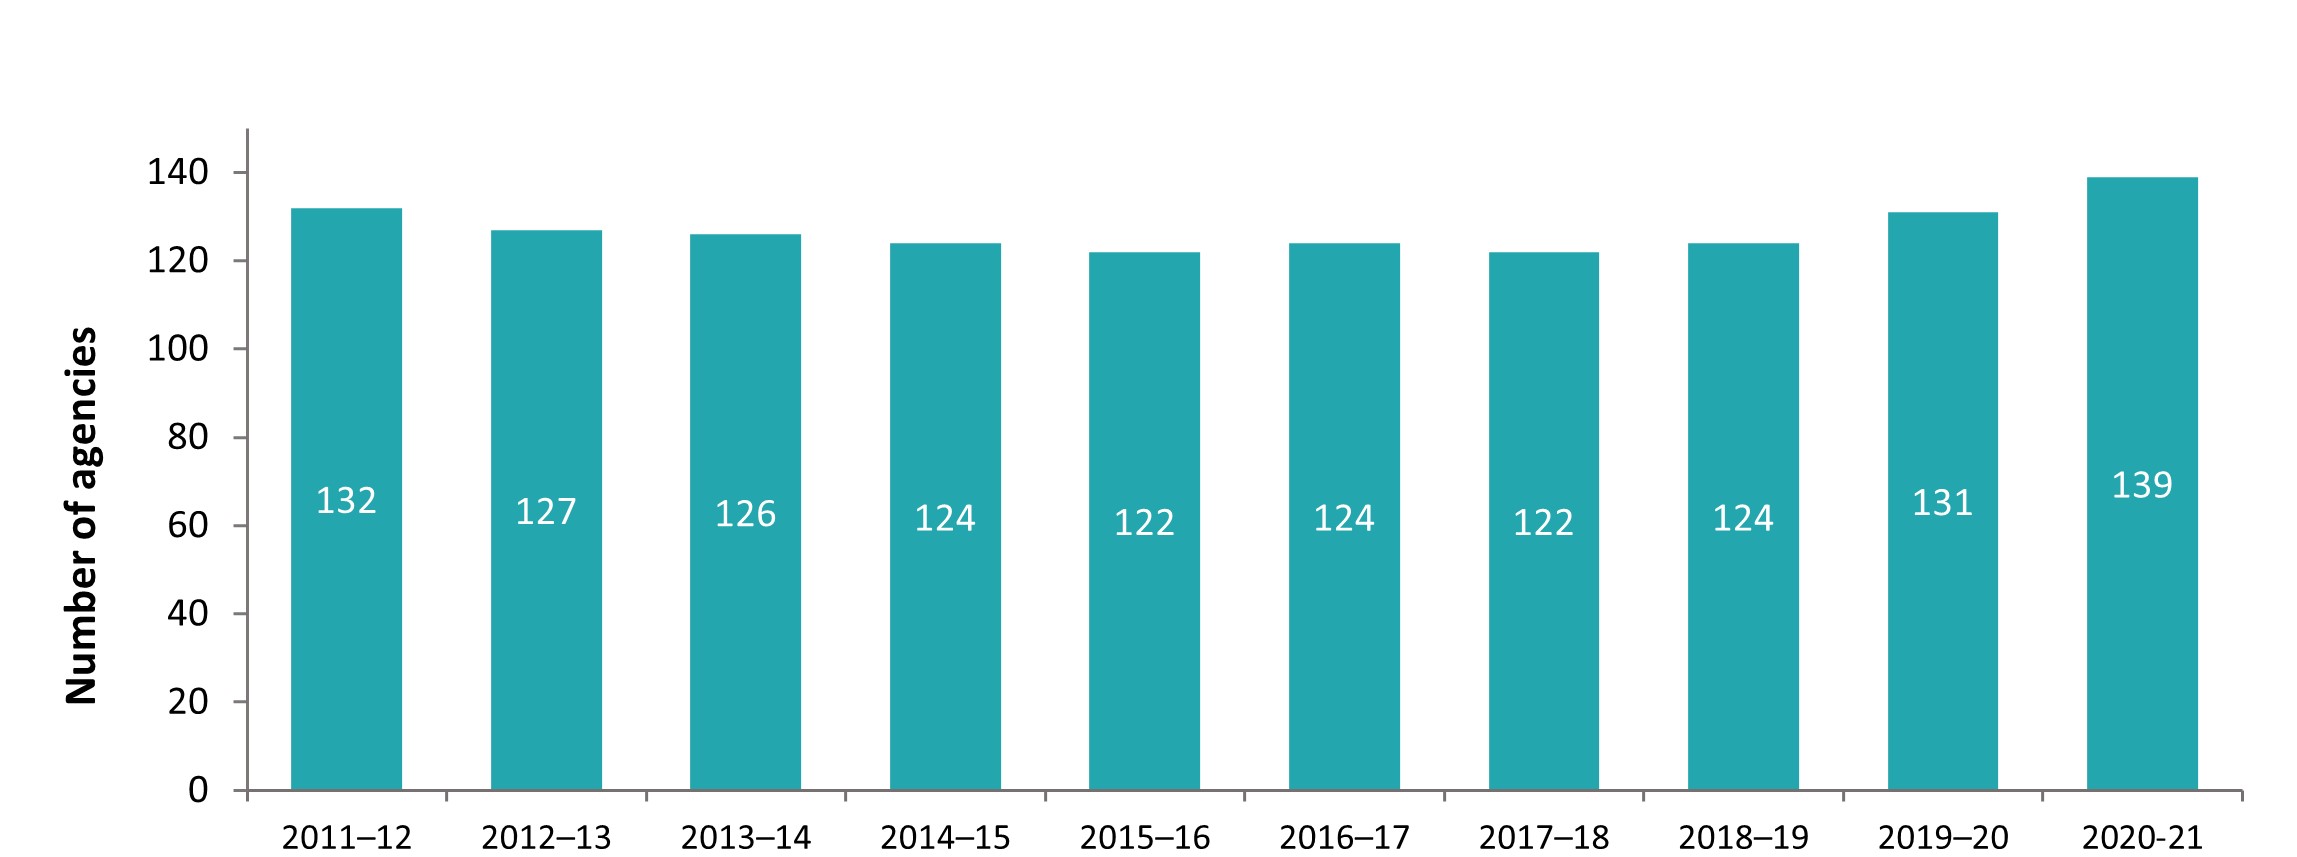 Licensed home child care agencies, 2011-12 to 2020-21